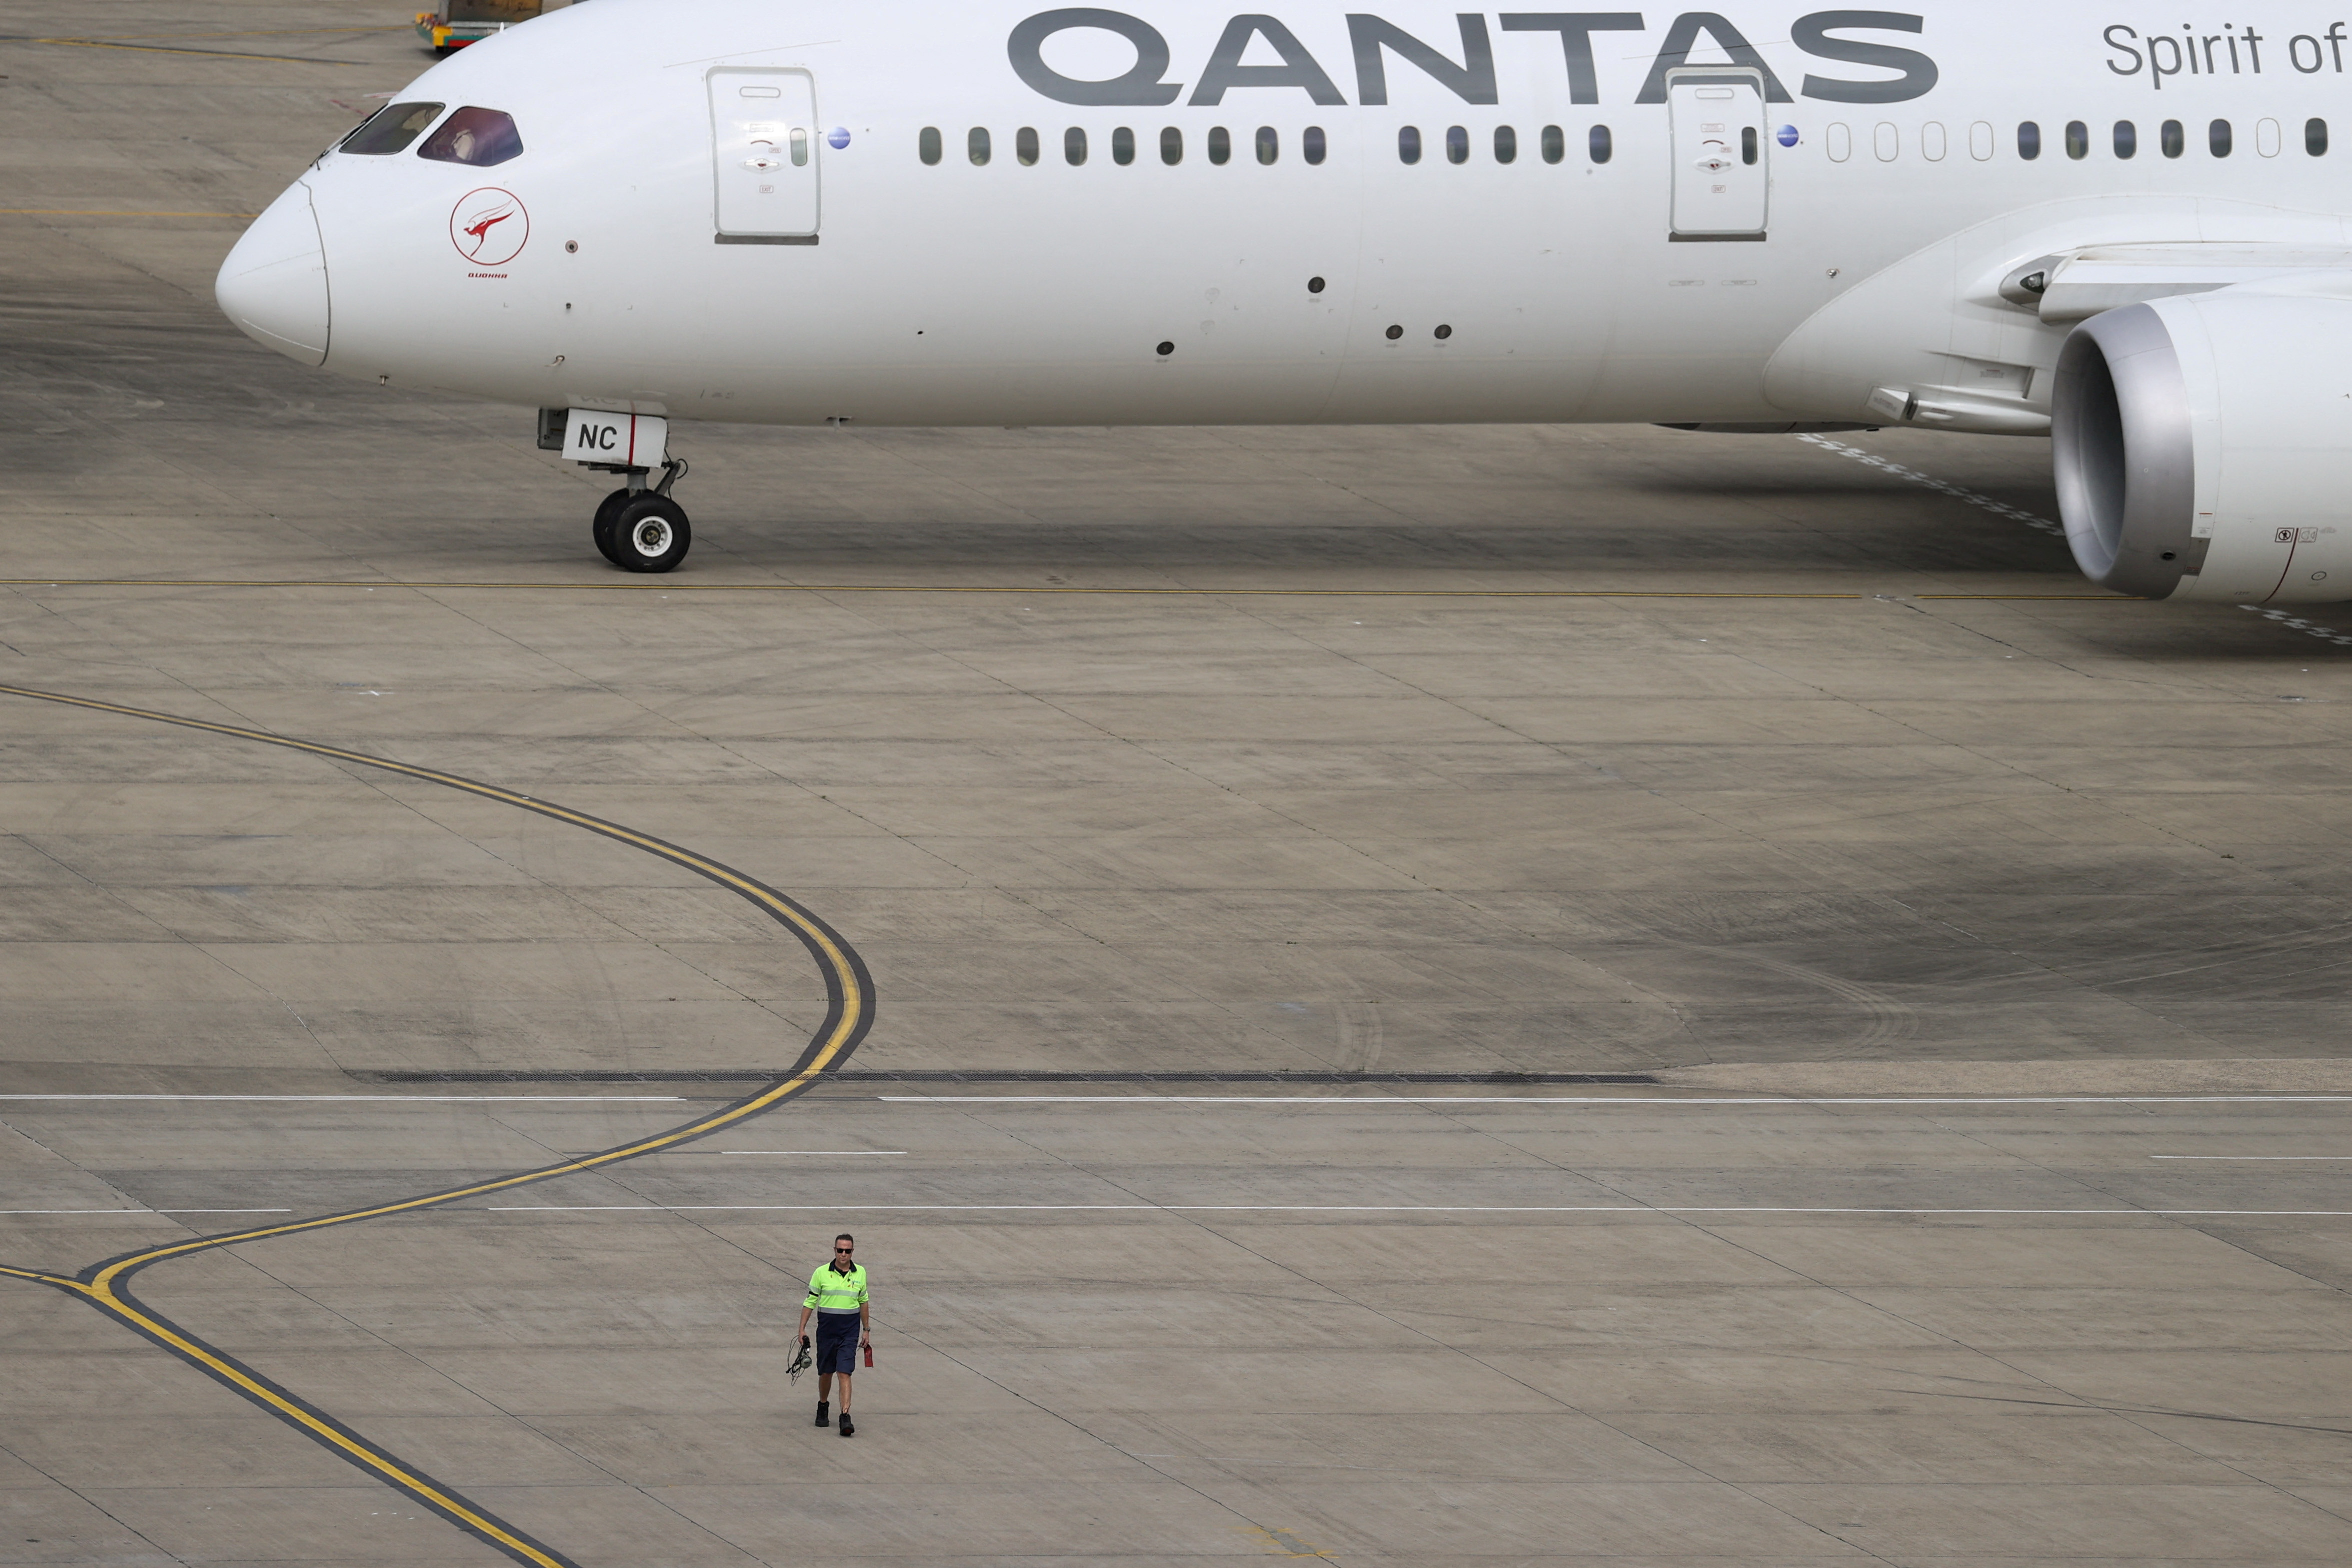 A ground worker walking near a Qantas plane is seen from the international terminal at Sydney Airport in Australia